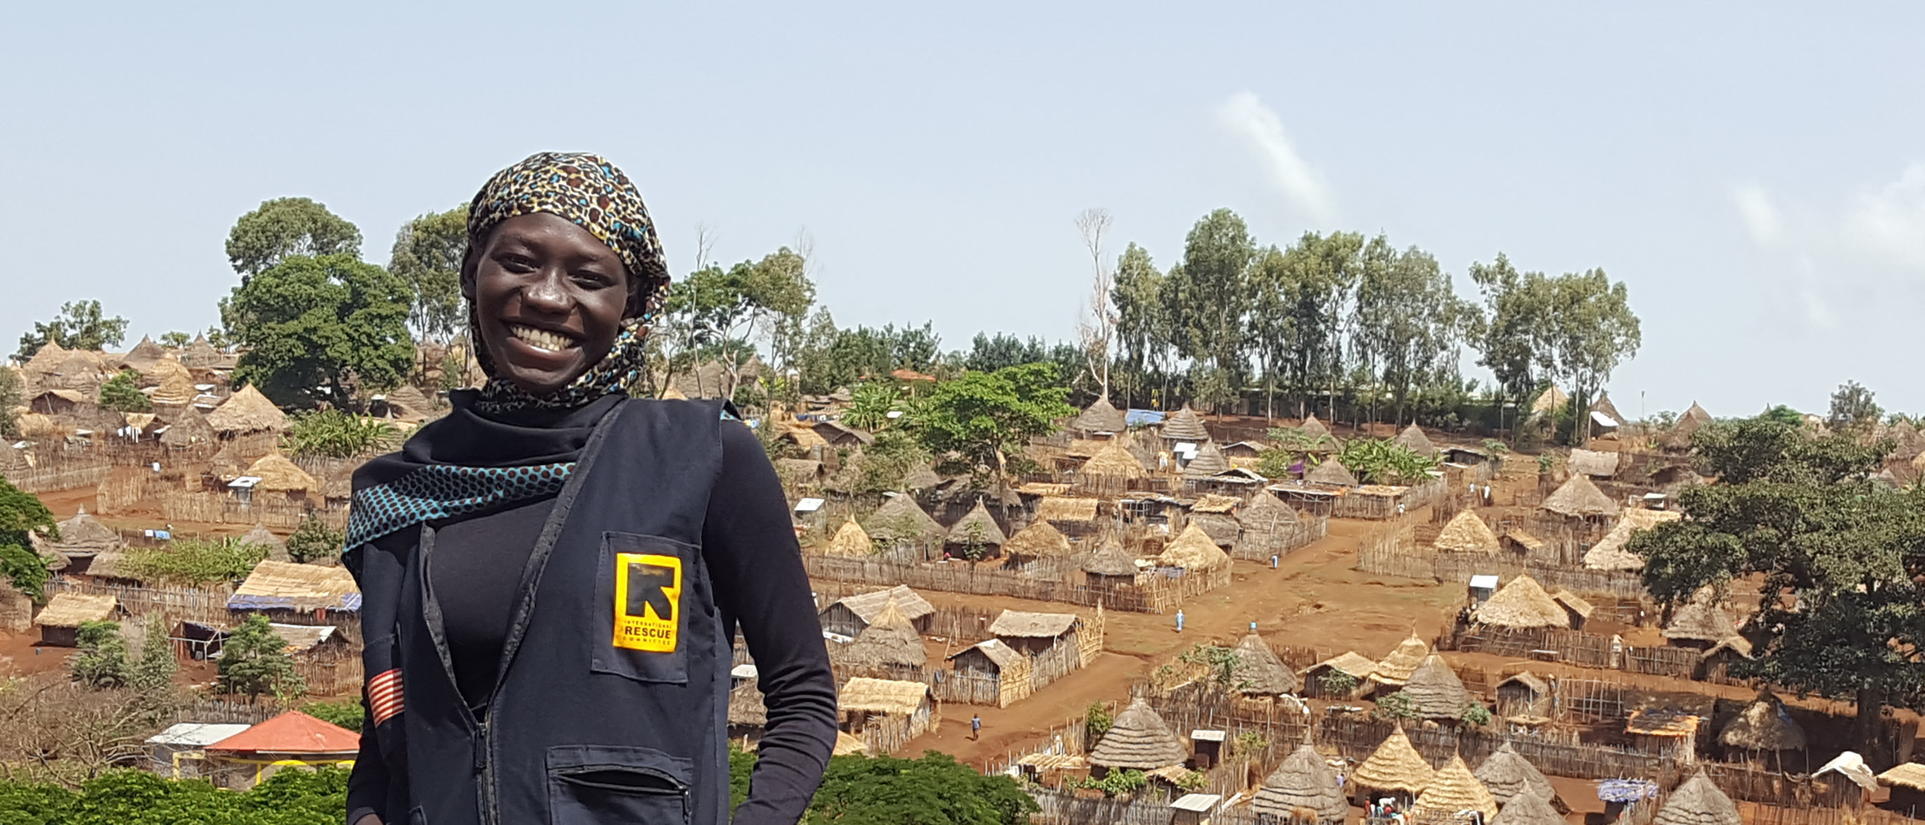 Hafiza, and IRC aid worker and refugee from South Sudan, stands in Tongo refugee camp in Ethiopia